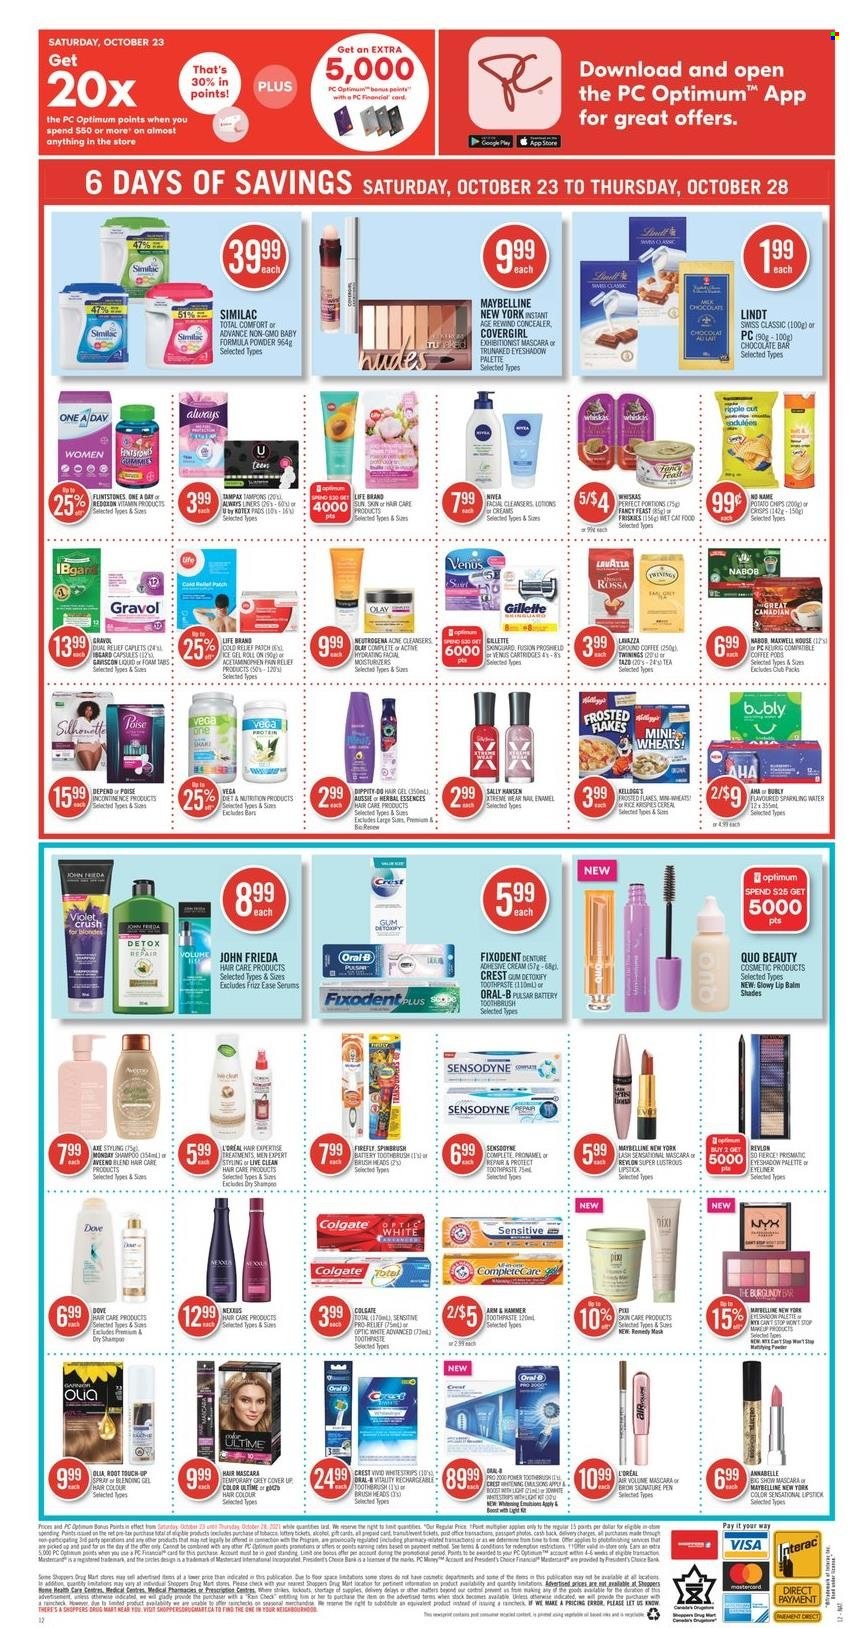 thumbnail - Shoppers Drug Mart Flyer - October 23, 2021 - October 28, 2021 - Sales products - Kellogg's, chocolate bar, potato chips, cereals, rice, sparkling water, Boost, tea, Twinings, coffee pods, L'Or, Keurig, Similac, toothpaste, Fixodent, Crest, Kotex, tampons, L’Oréal, lip balm, Olay, NYX Cosmetics, Root Touch-Up, Aussie, Palette, hair color, Herbal Essences, John Frieda, roll-on, Venus, corrector, eyeshadow, mascara, shades, Dove, Colgate, Gillette, Maybelline, Neutrogena, Sally Hansen, Tampax, Nivea, Oral-B, chips, Sensodyne, Lindt. Page 18.